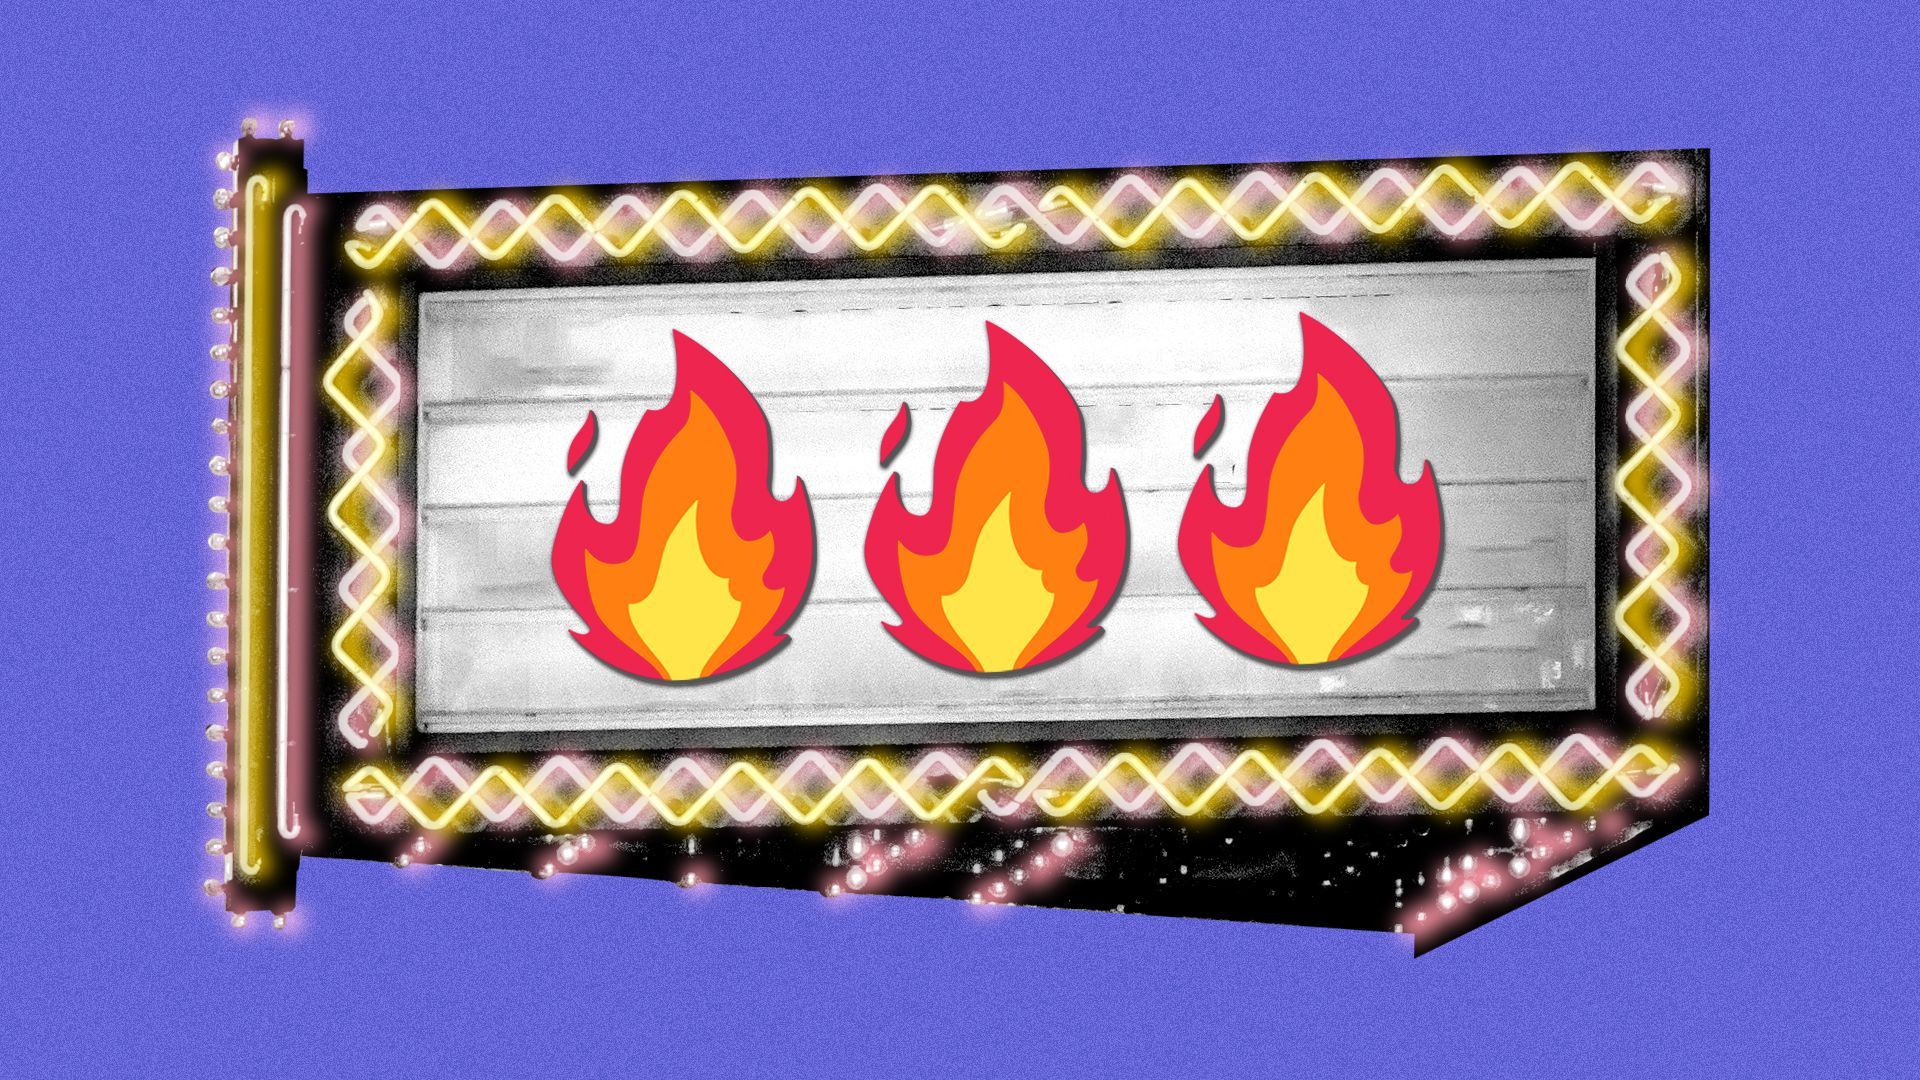 Illustration of a marquee with three fire emojis on it.